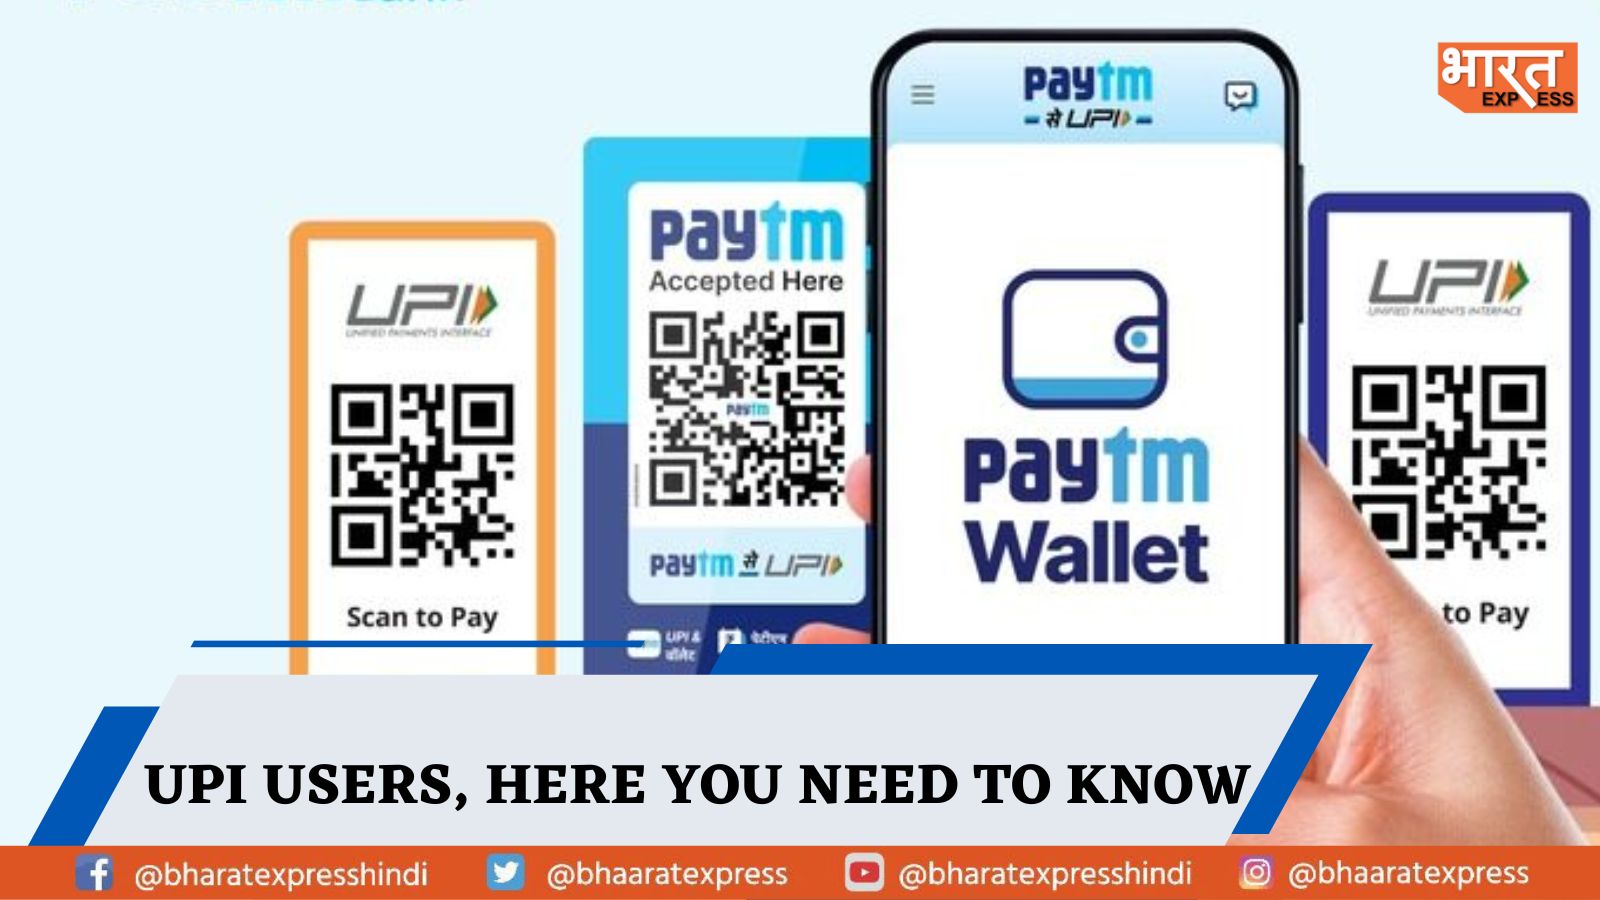 UPI Payment: No more free lunches